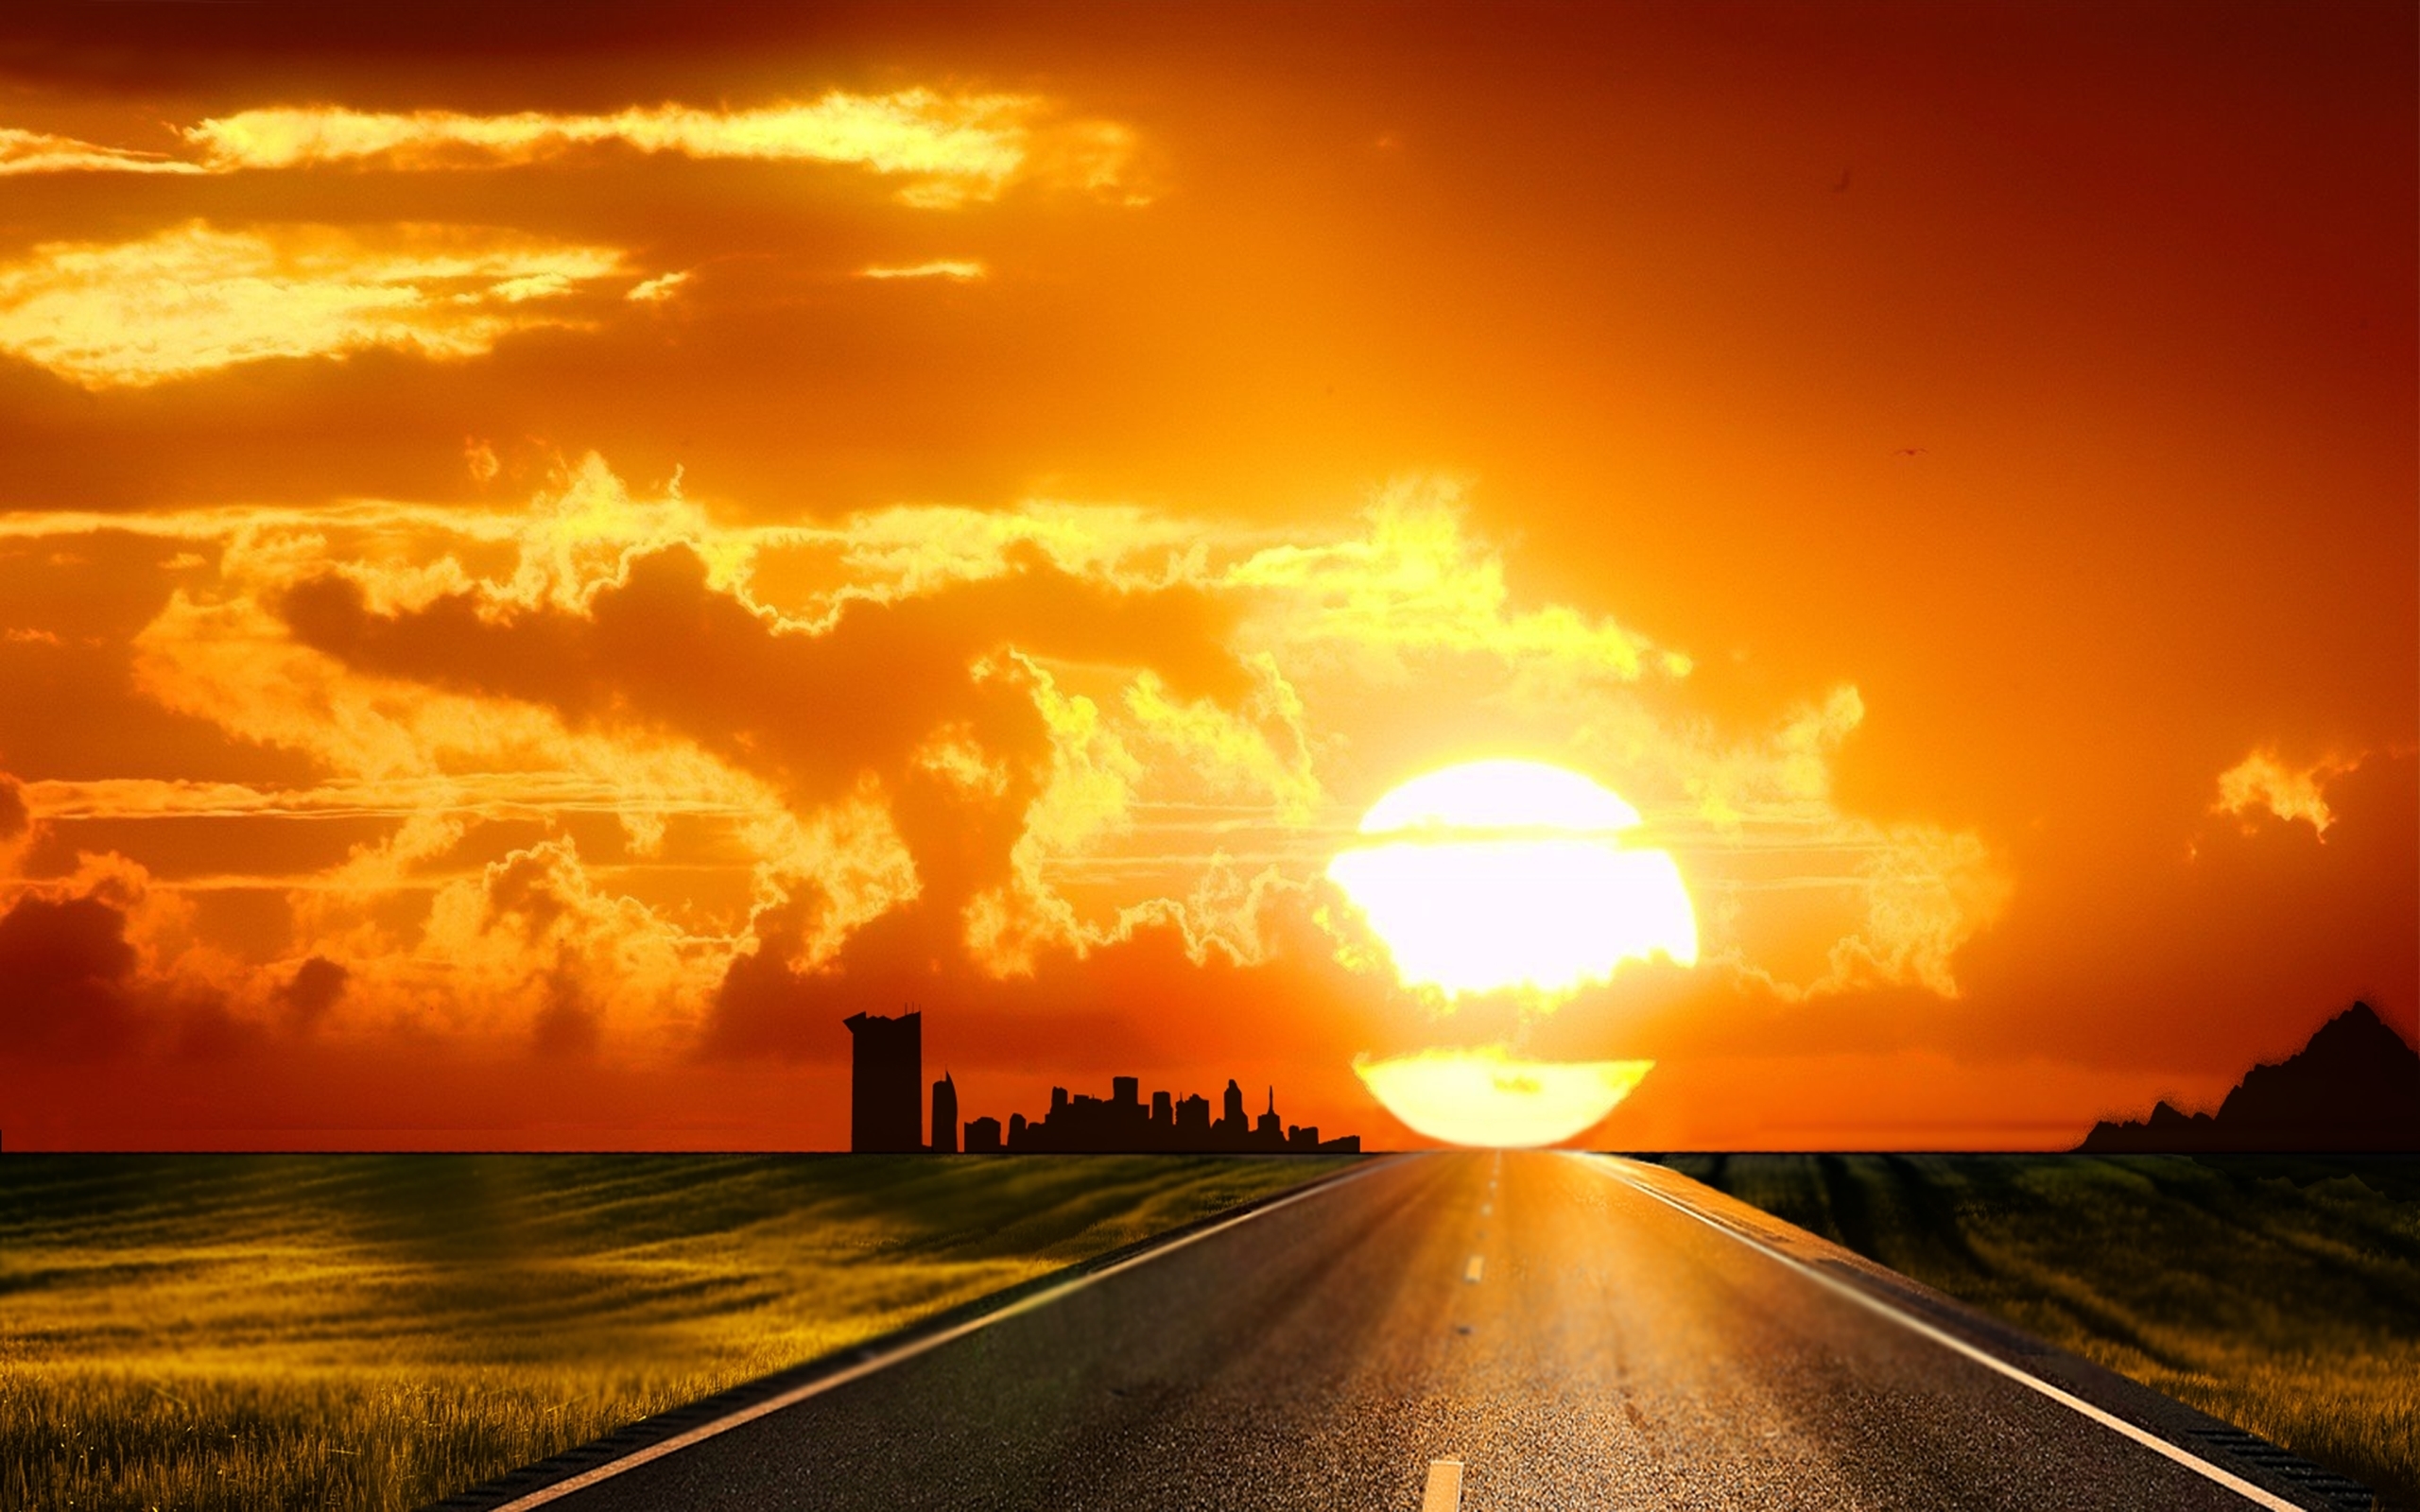 Sunset Background Images Hd Sunset Background Images Hd ...